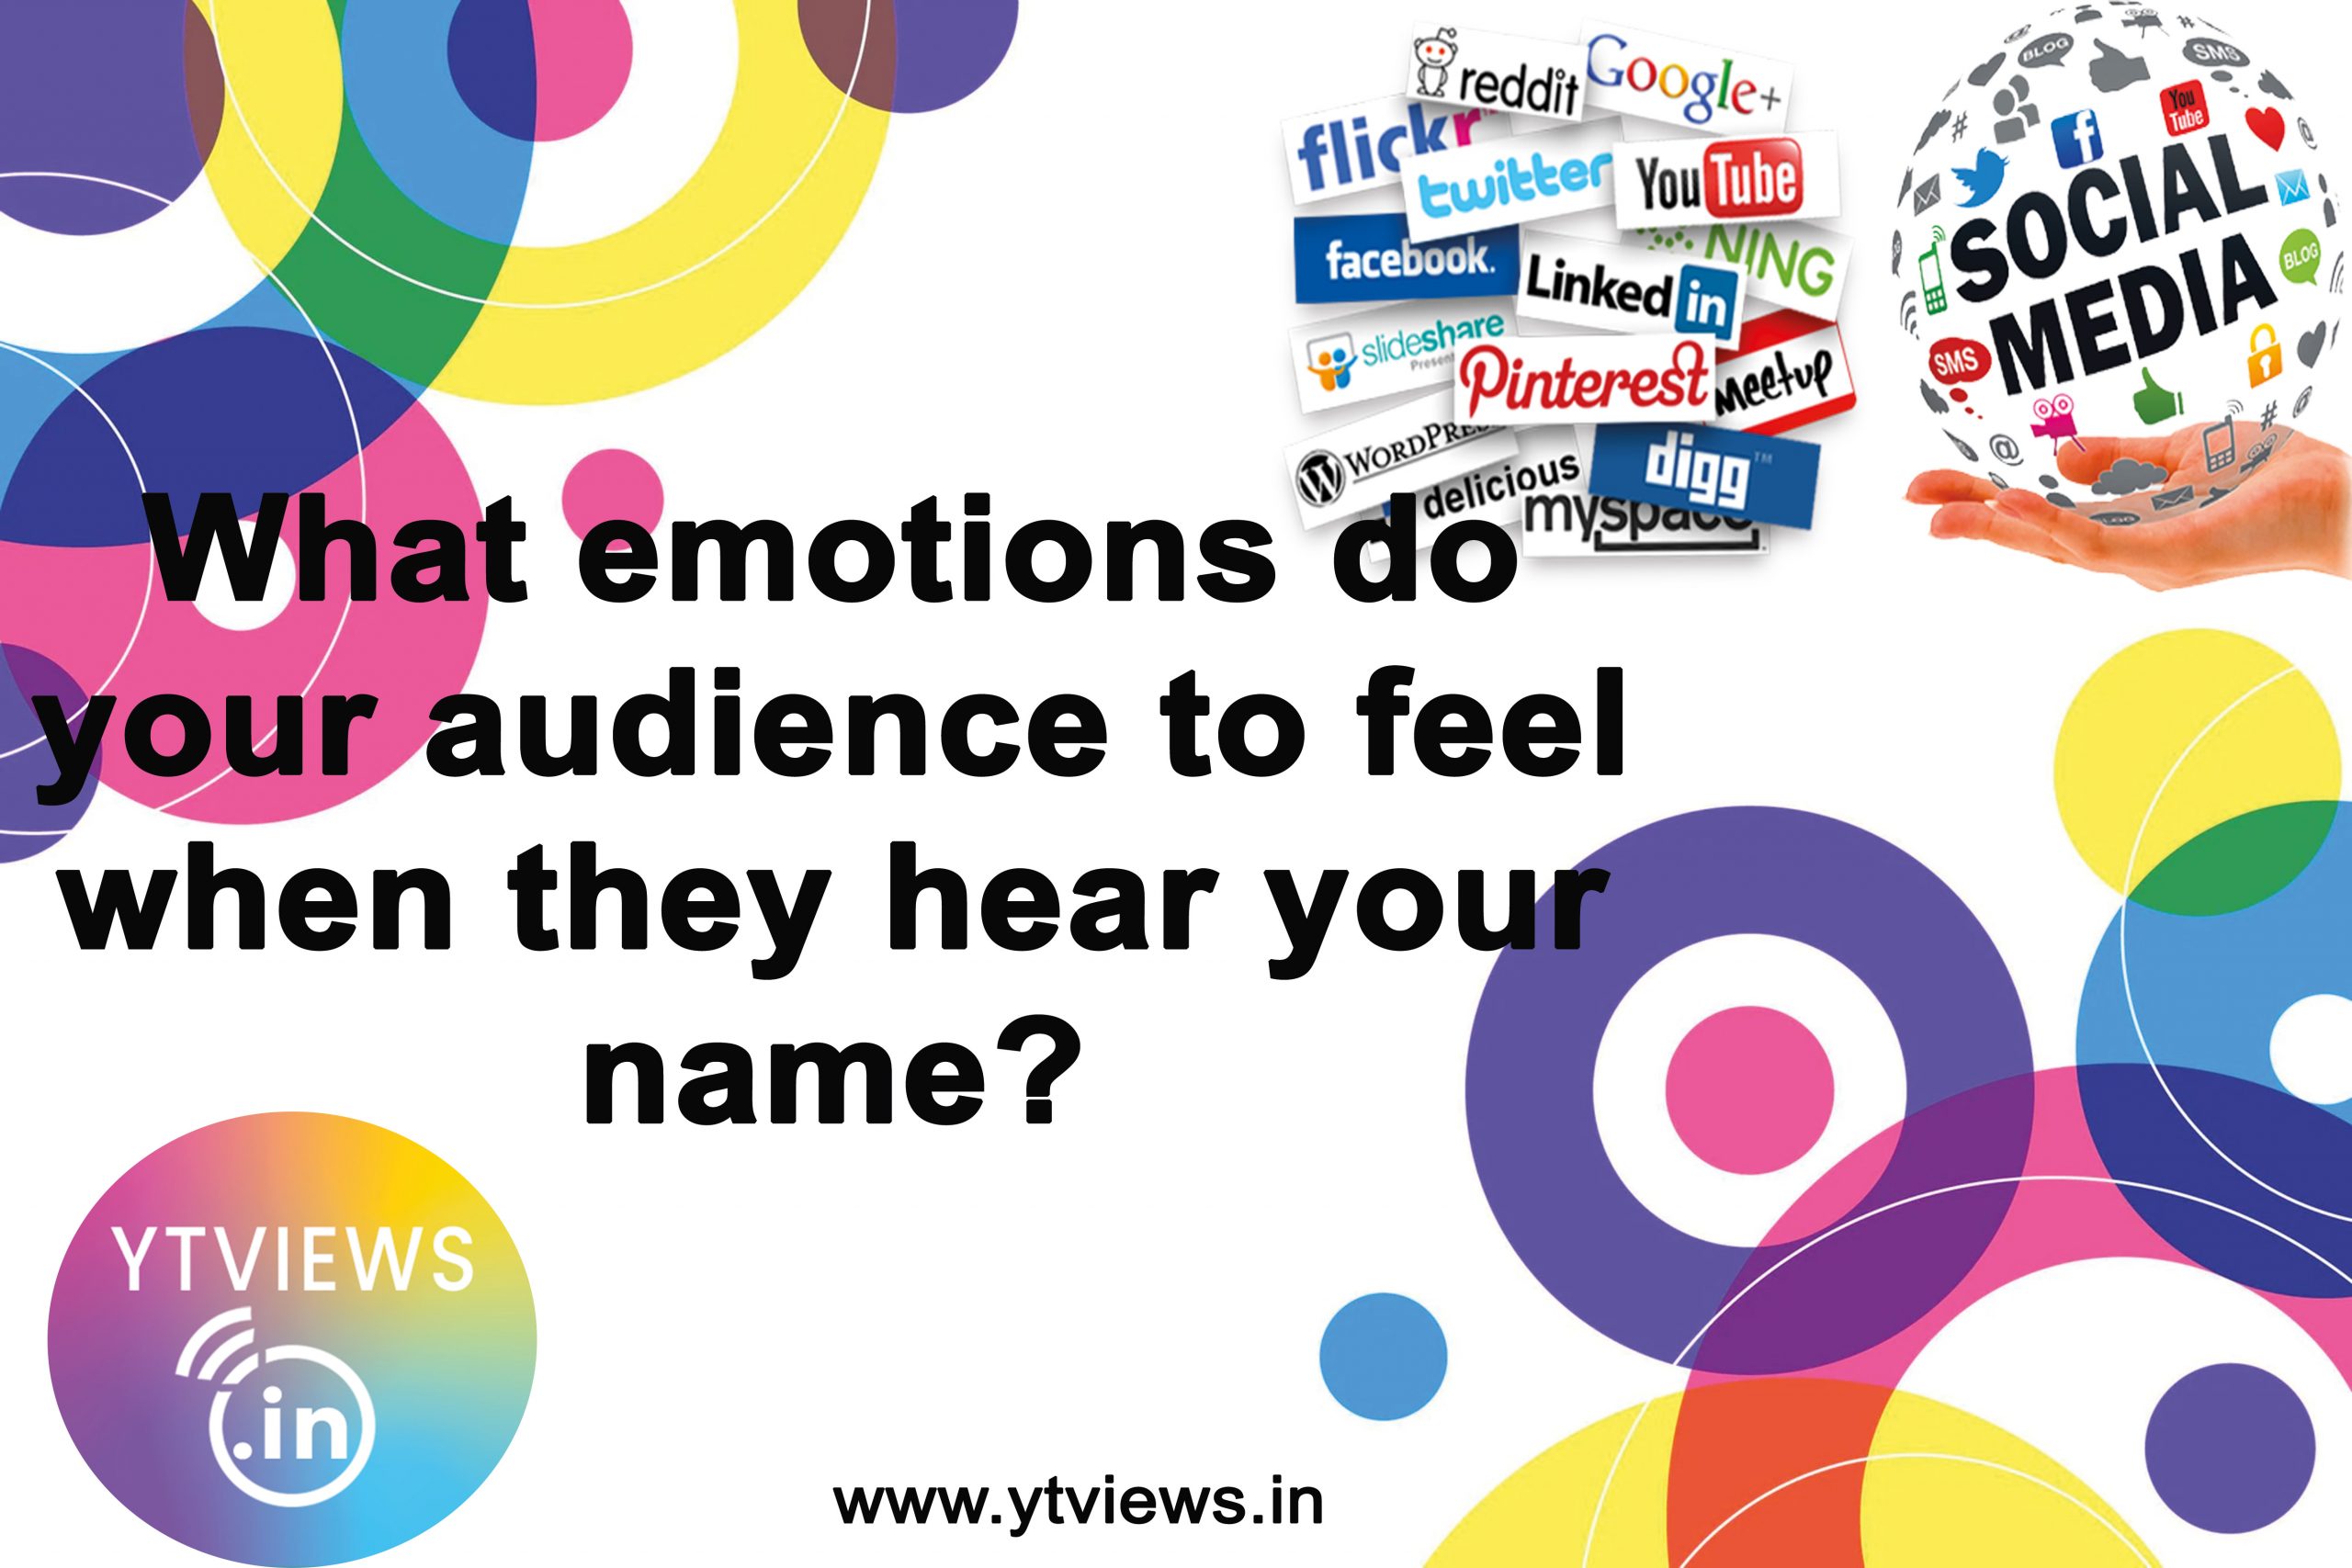 What emotions do your audience to feel when they hear your name?